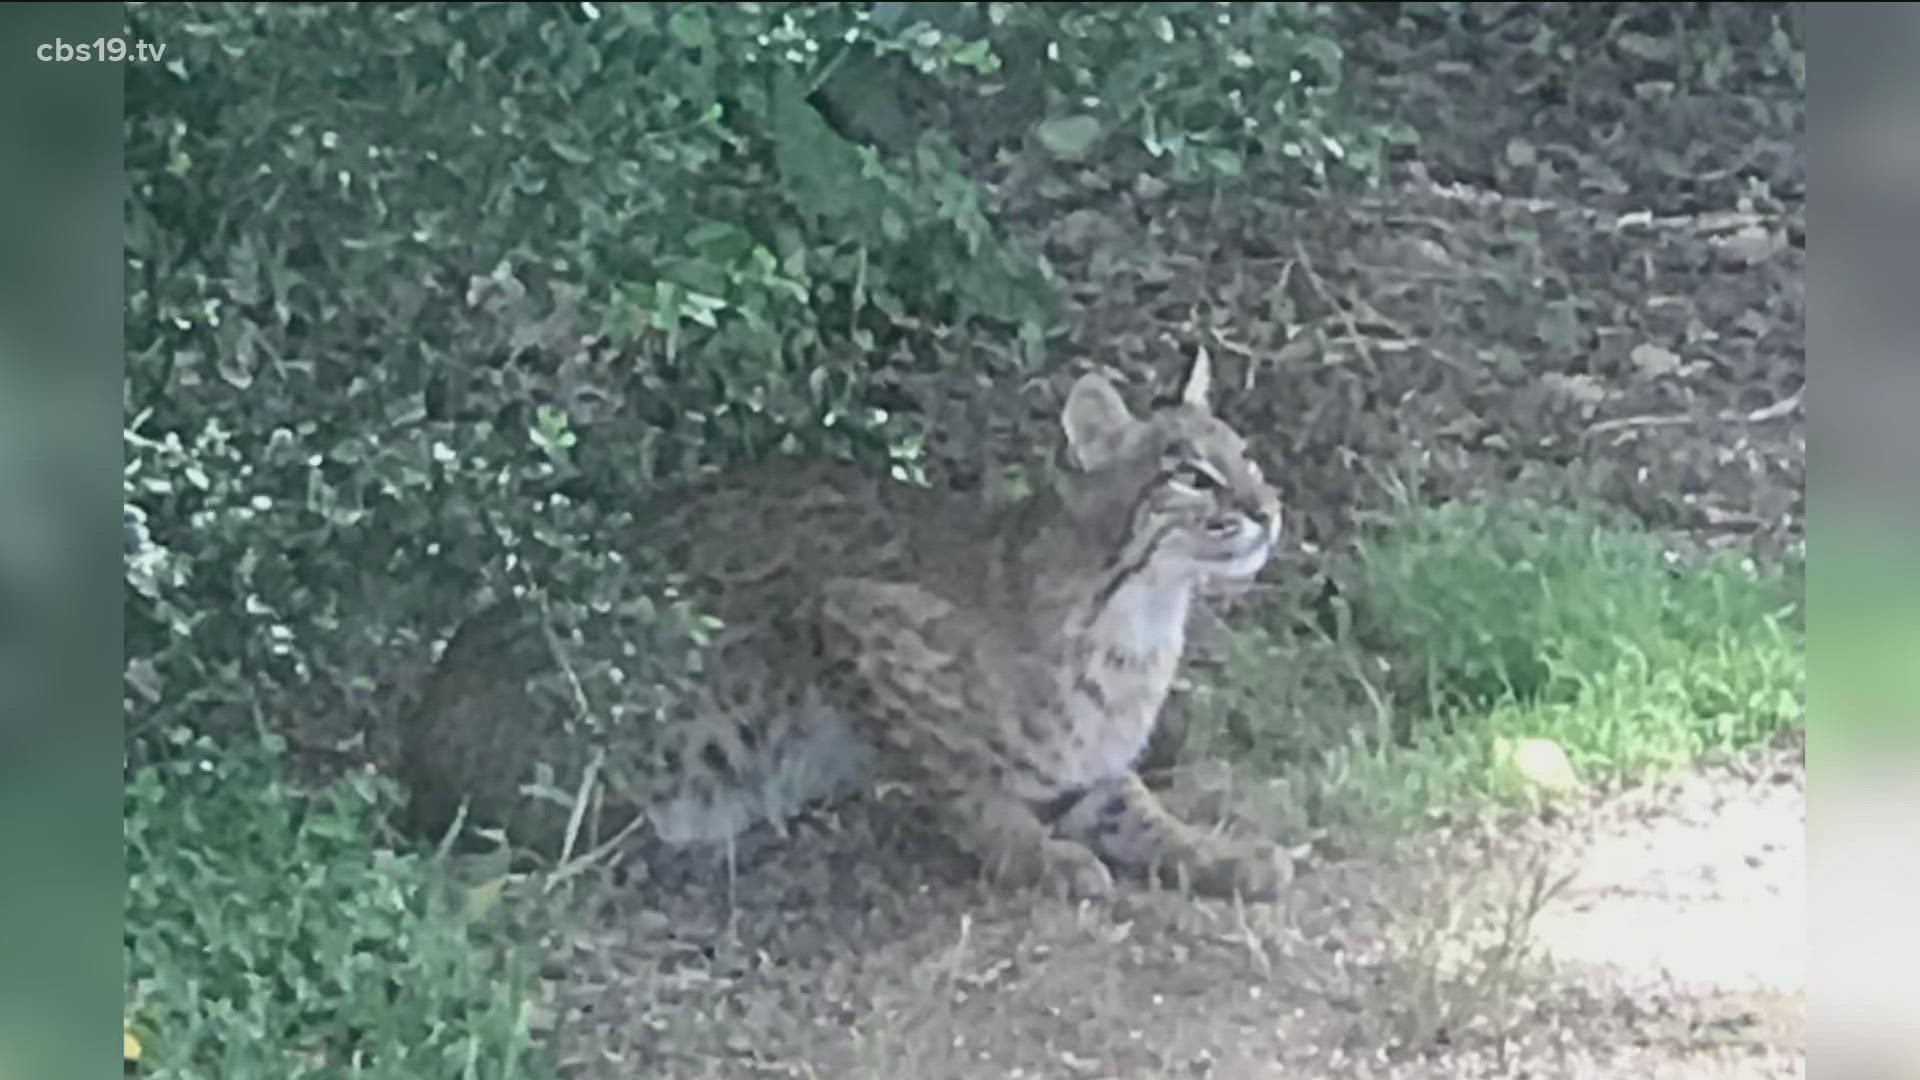 After reviewing the viral video showing the cat in question, experts confirmed it is a bobcat.